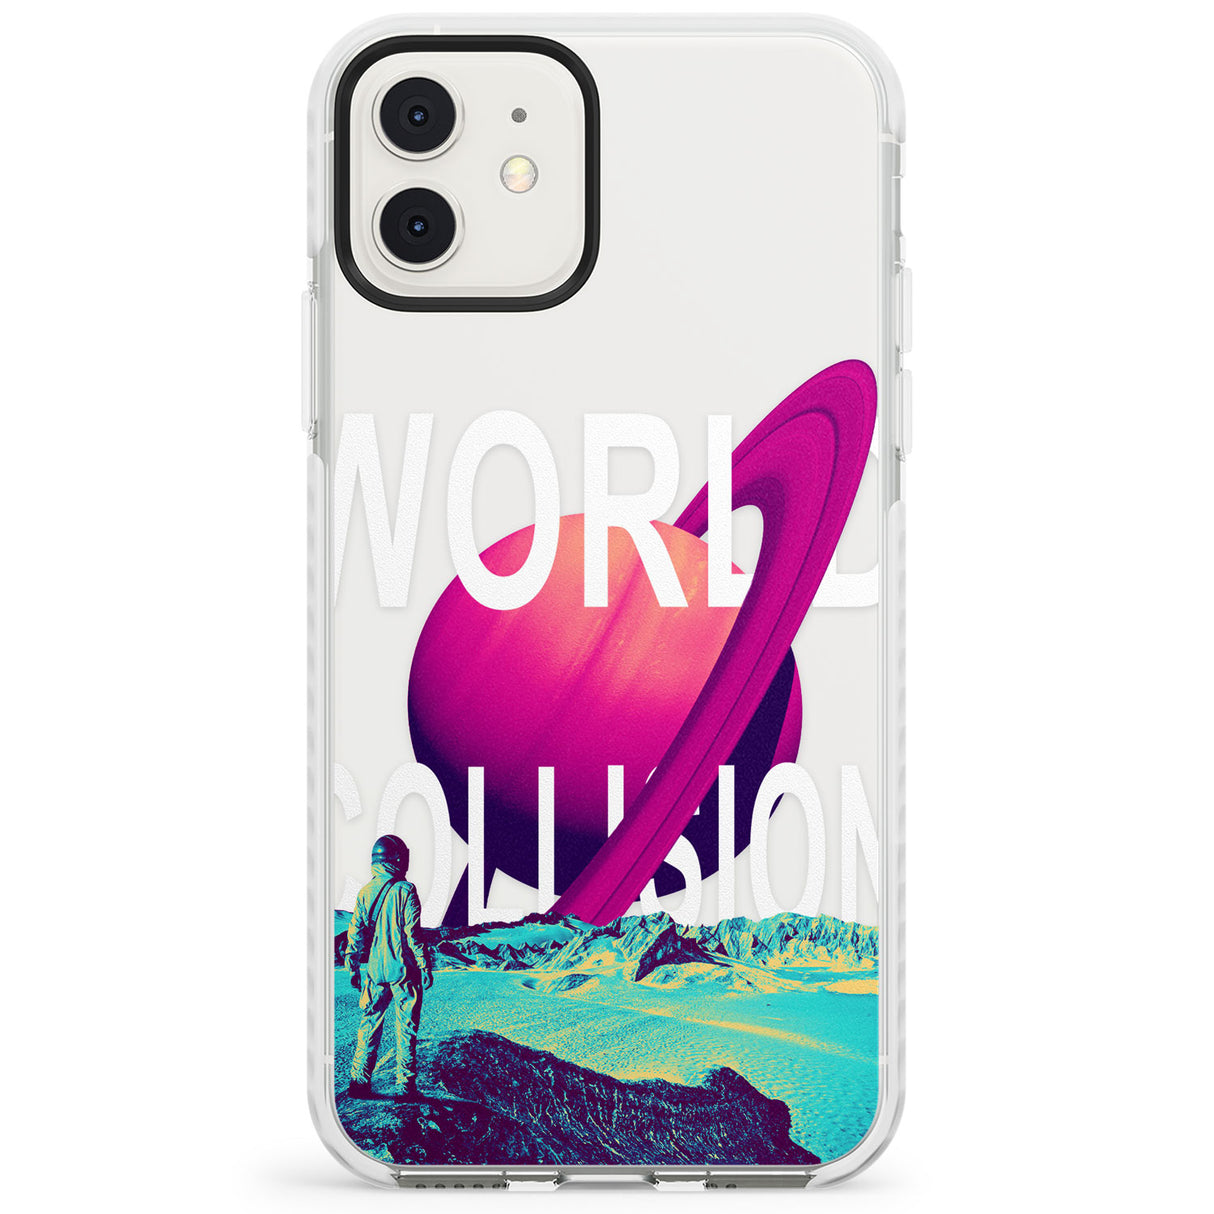 World Collision Impact Phone Case for iPhone 11, iphone 12